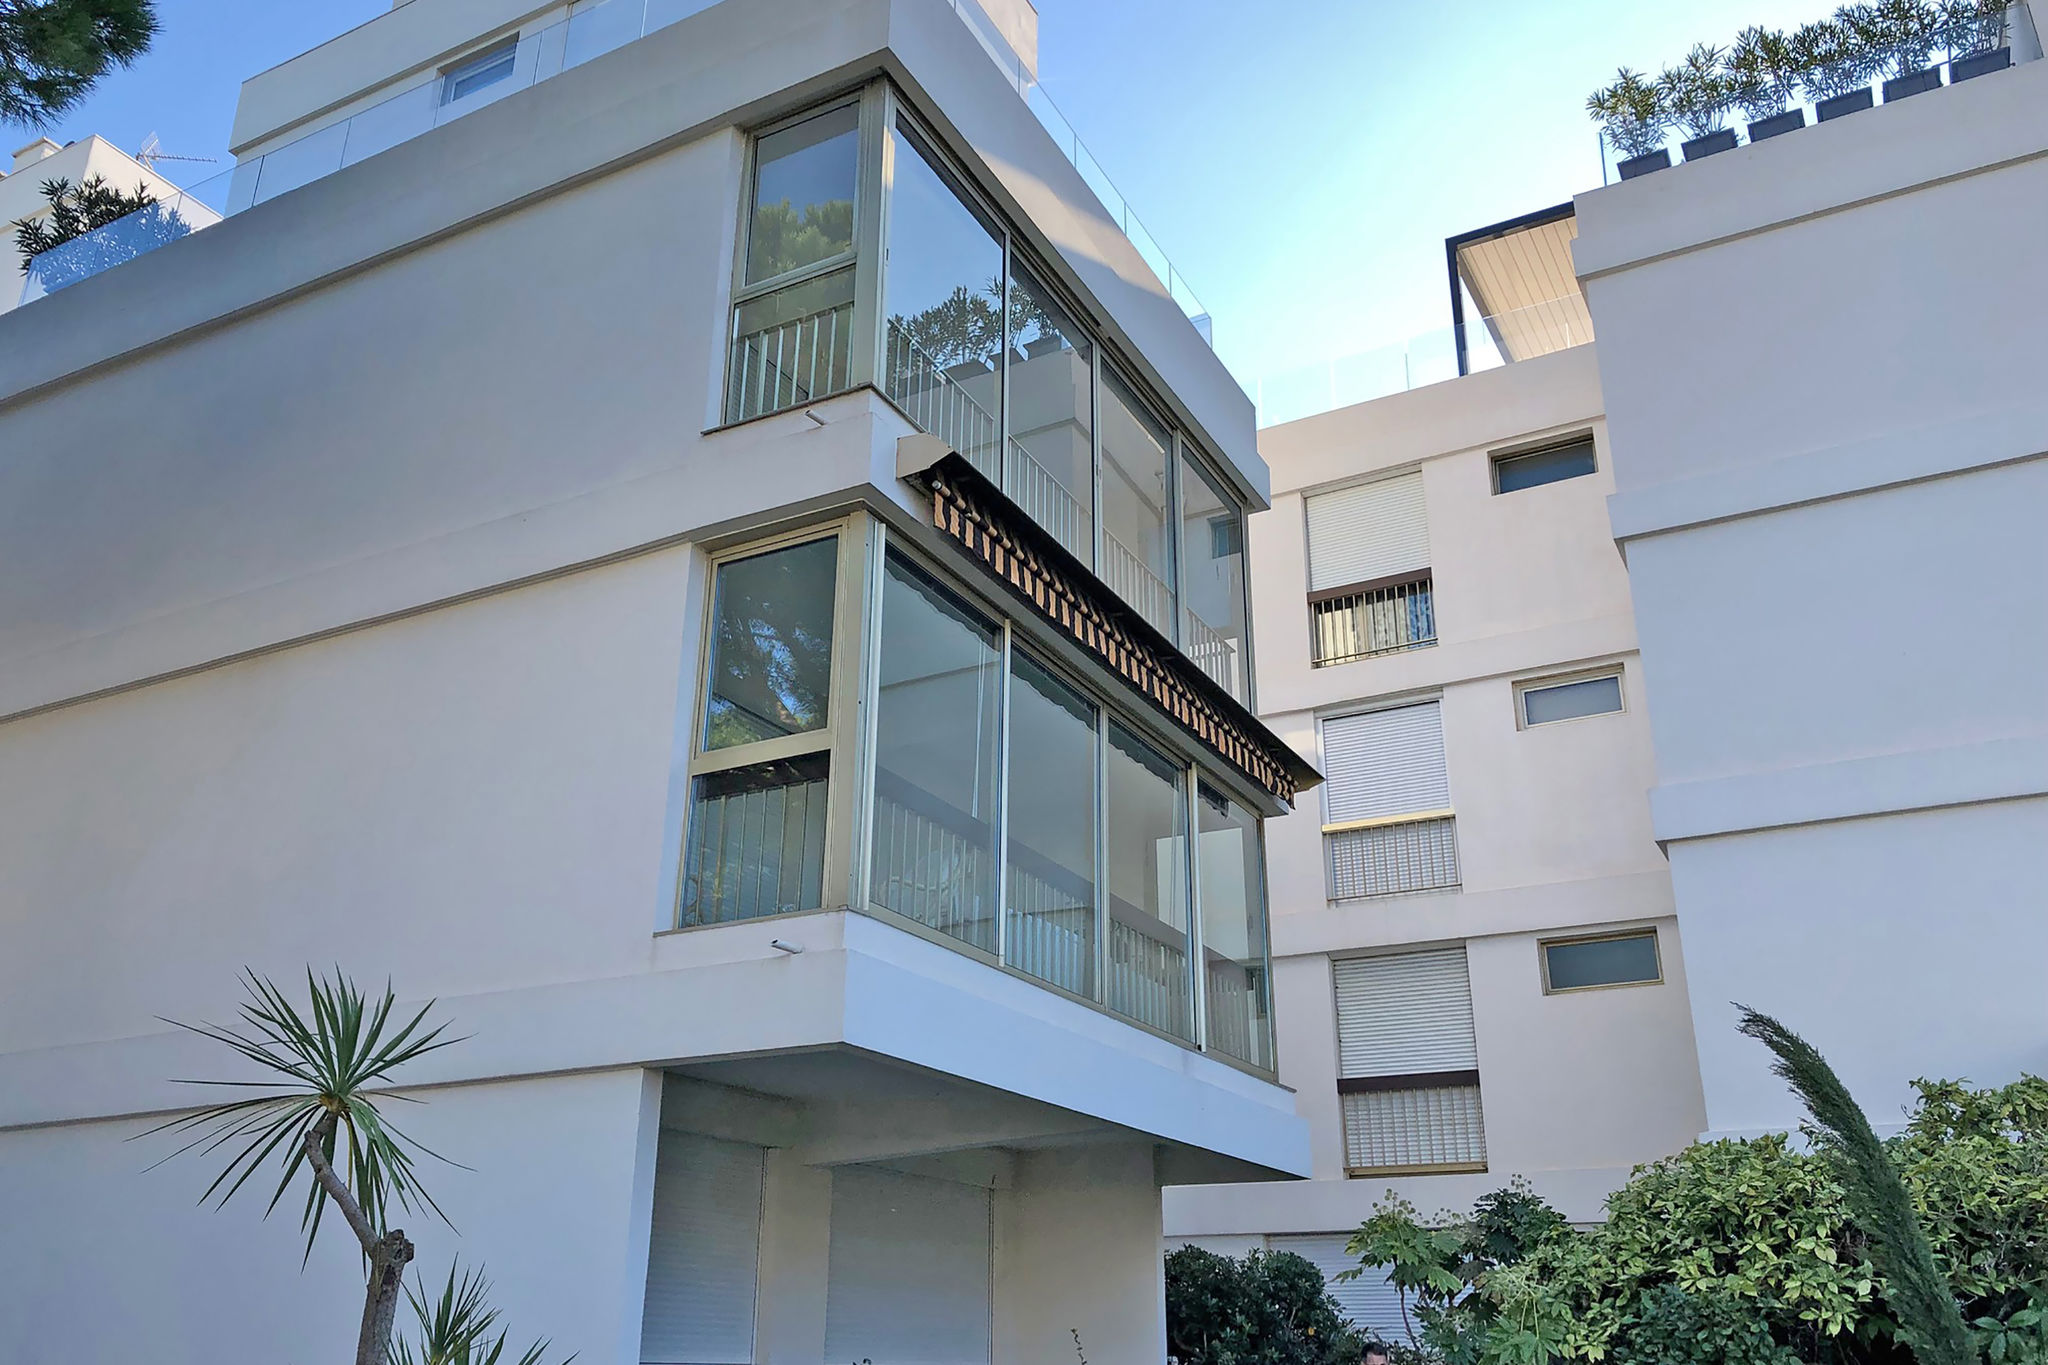 Modern apartment with air conditioning, pool and tennis courts, within walking distance of the beach